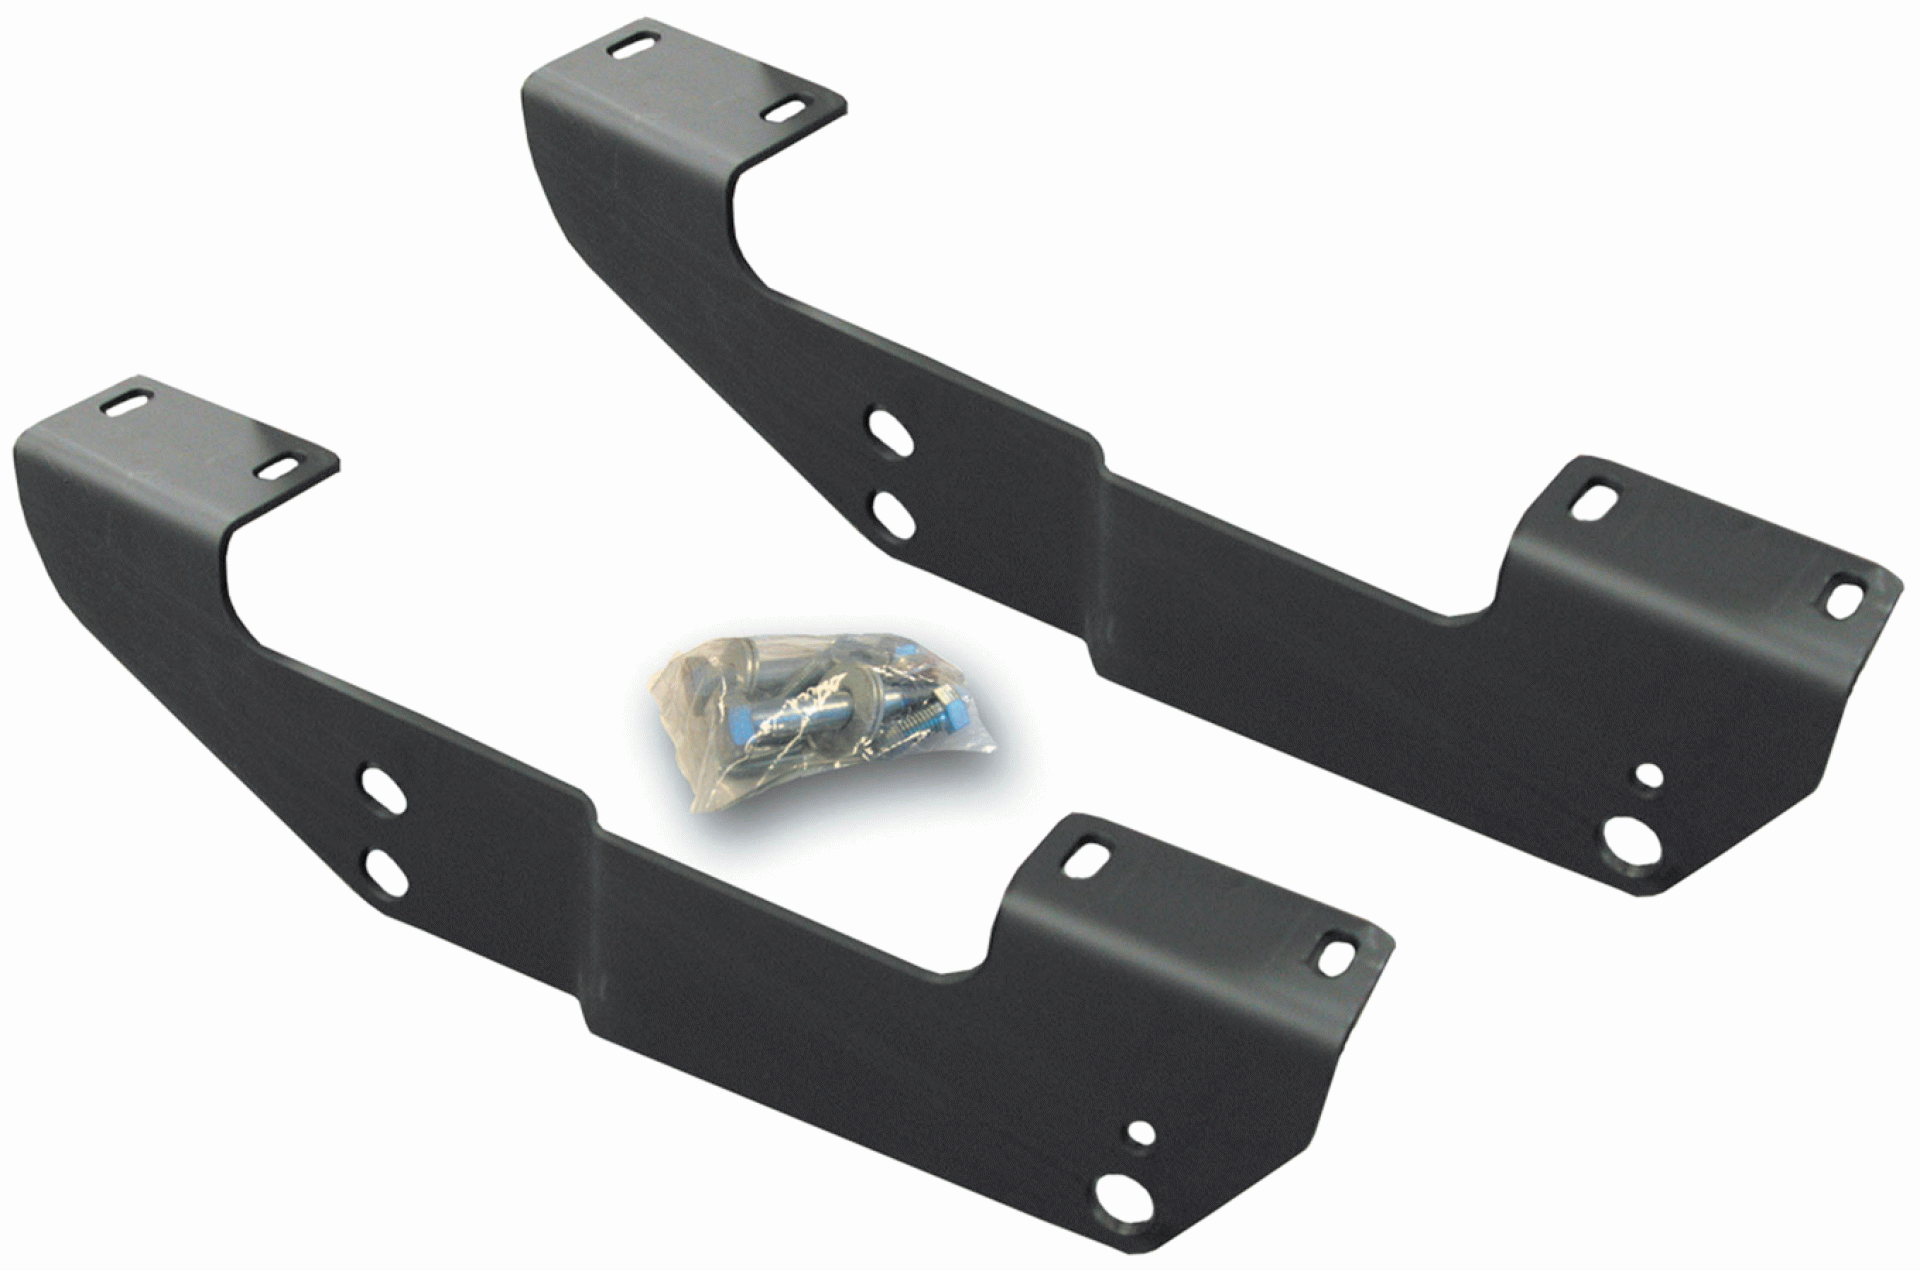 REESE | 50040 | BRACKET KIT FOR FIFTH WHEEL FOR DODGE 1500(YRS 02-08) & 2500 HD(YRS 03-10) EXCEPT MEGA CAB & MODELS WITH OVERLOAD SPRINGS